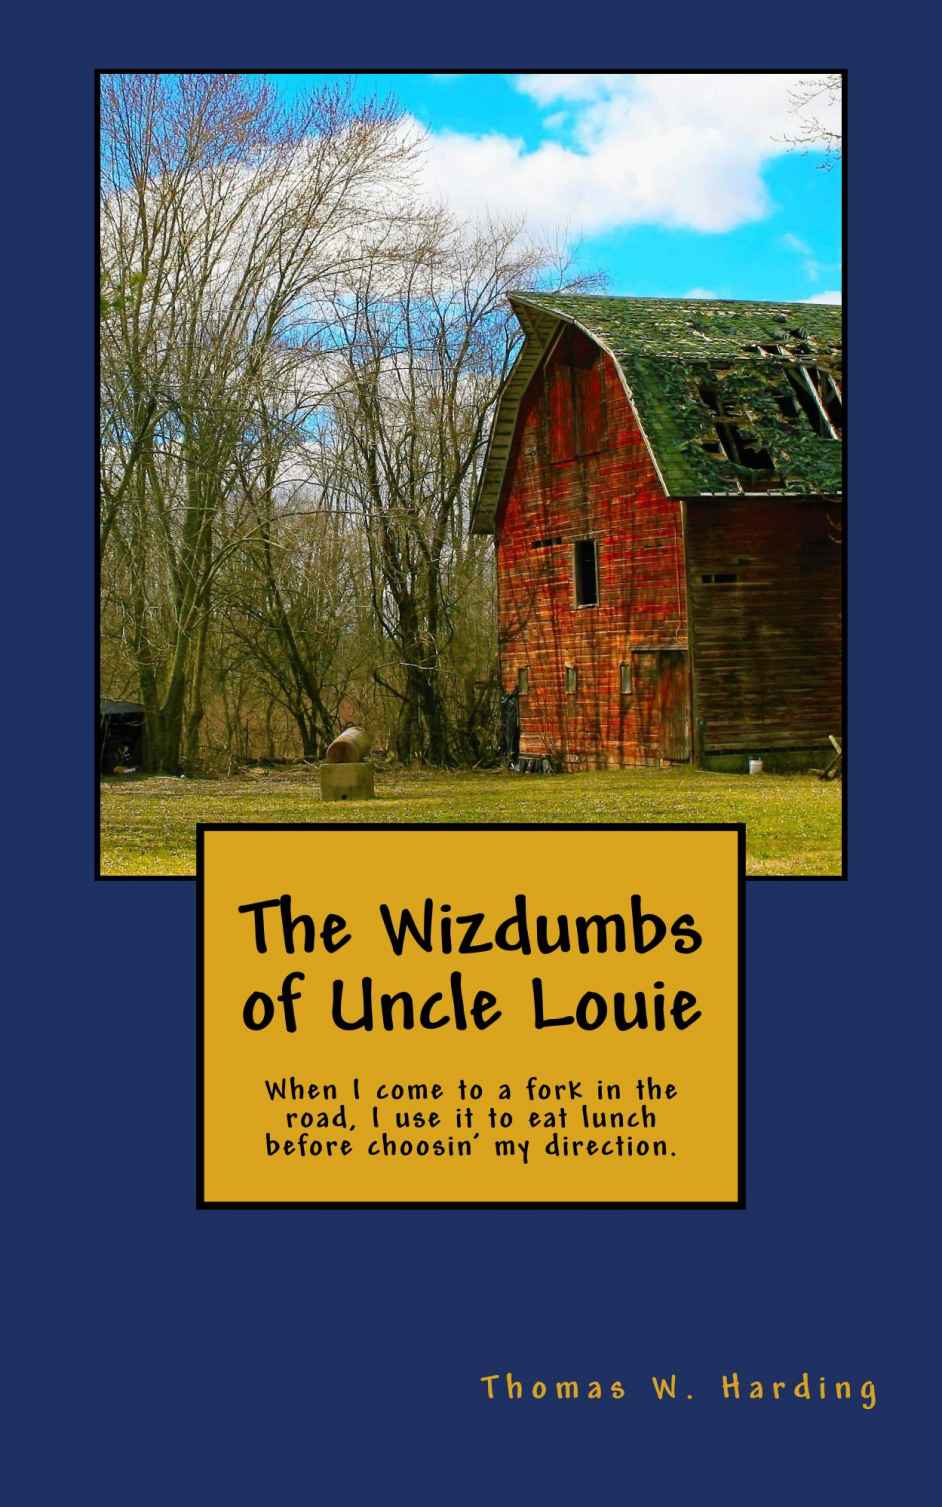 FREE: The Wizdumbs of Uncle Louie by Thomas Harding